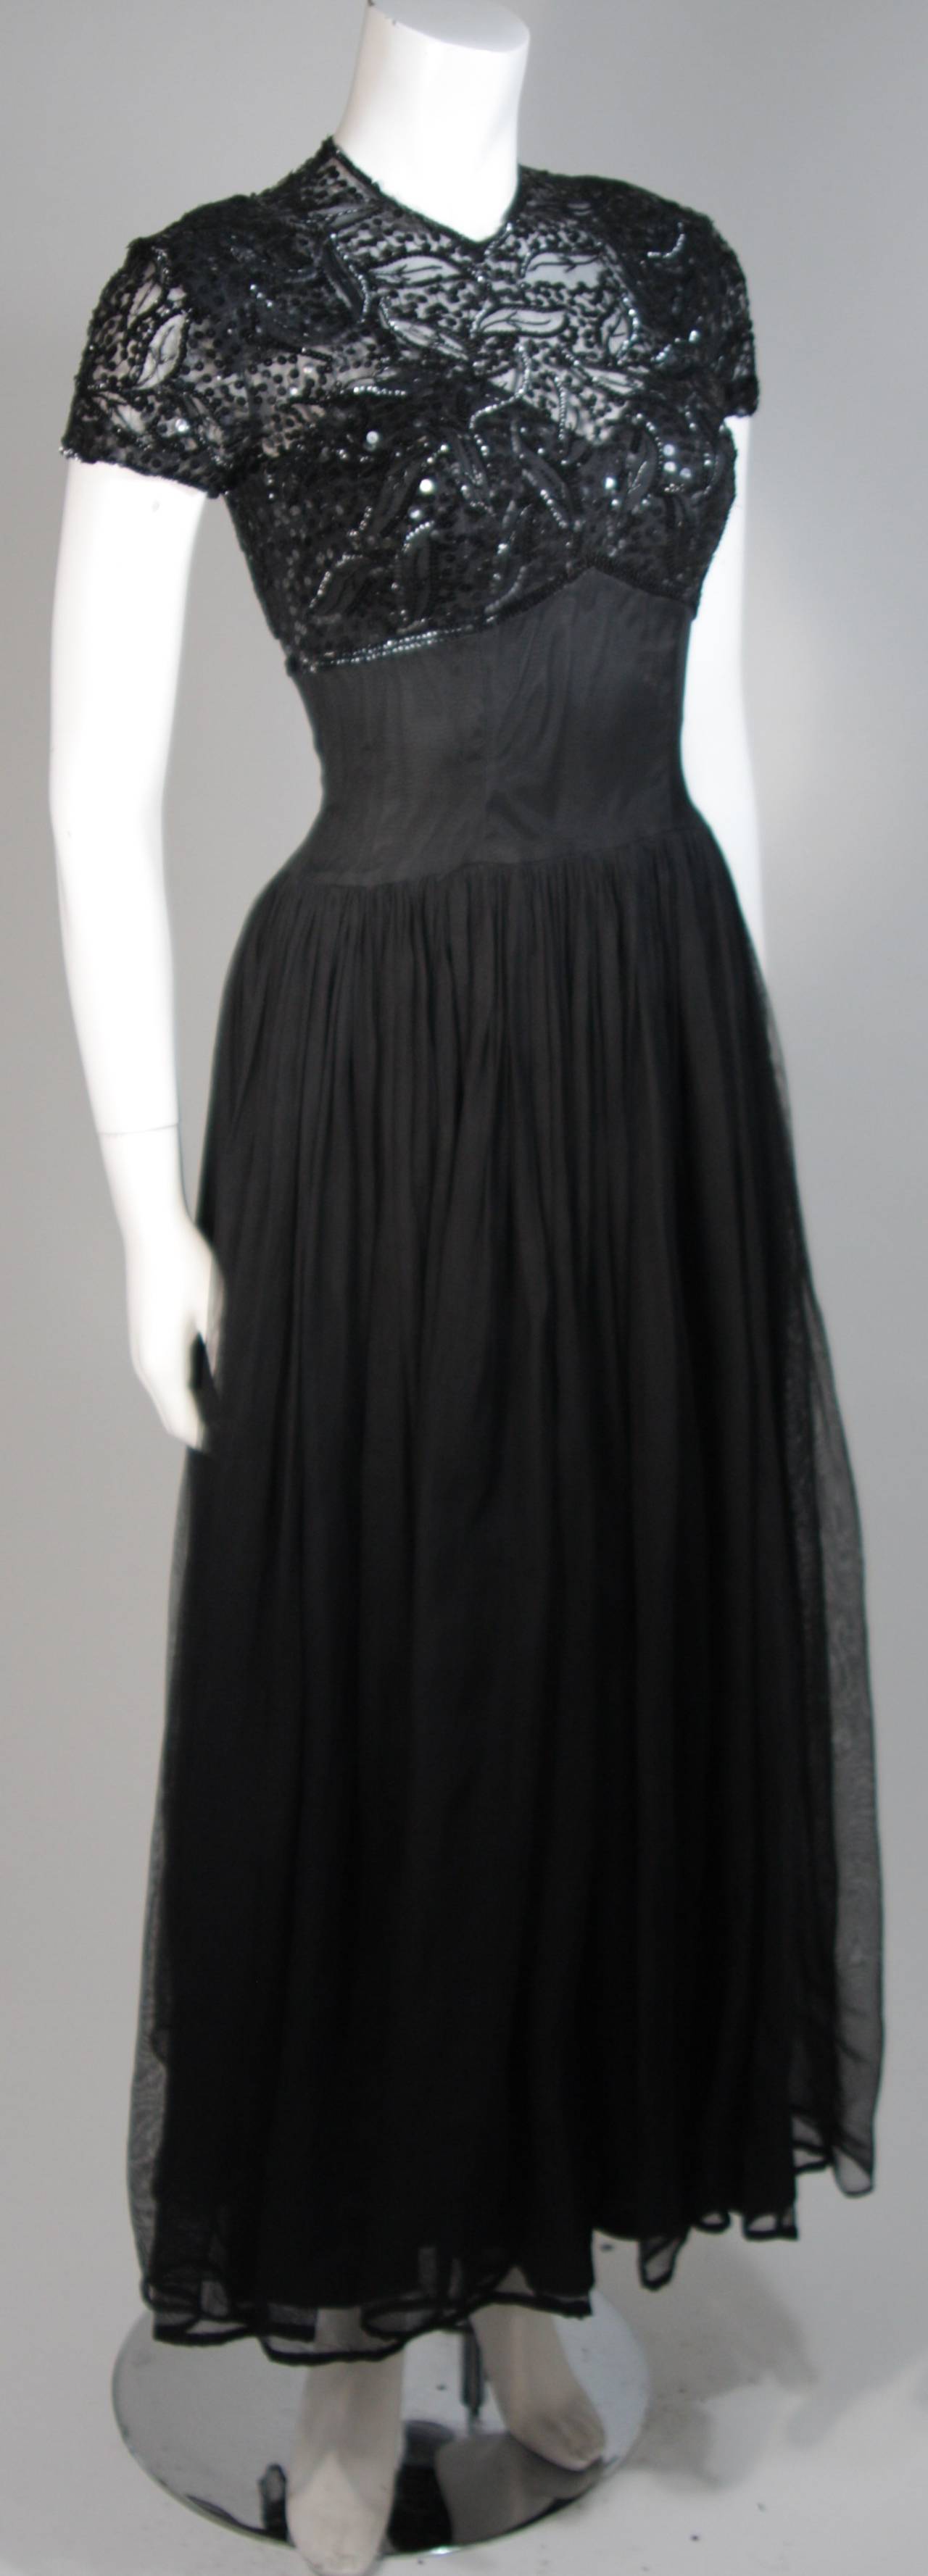 Ceil Chapman Attributed Black Gown with Beaded Bodice Size Small For Sale 1